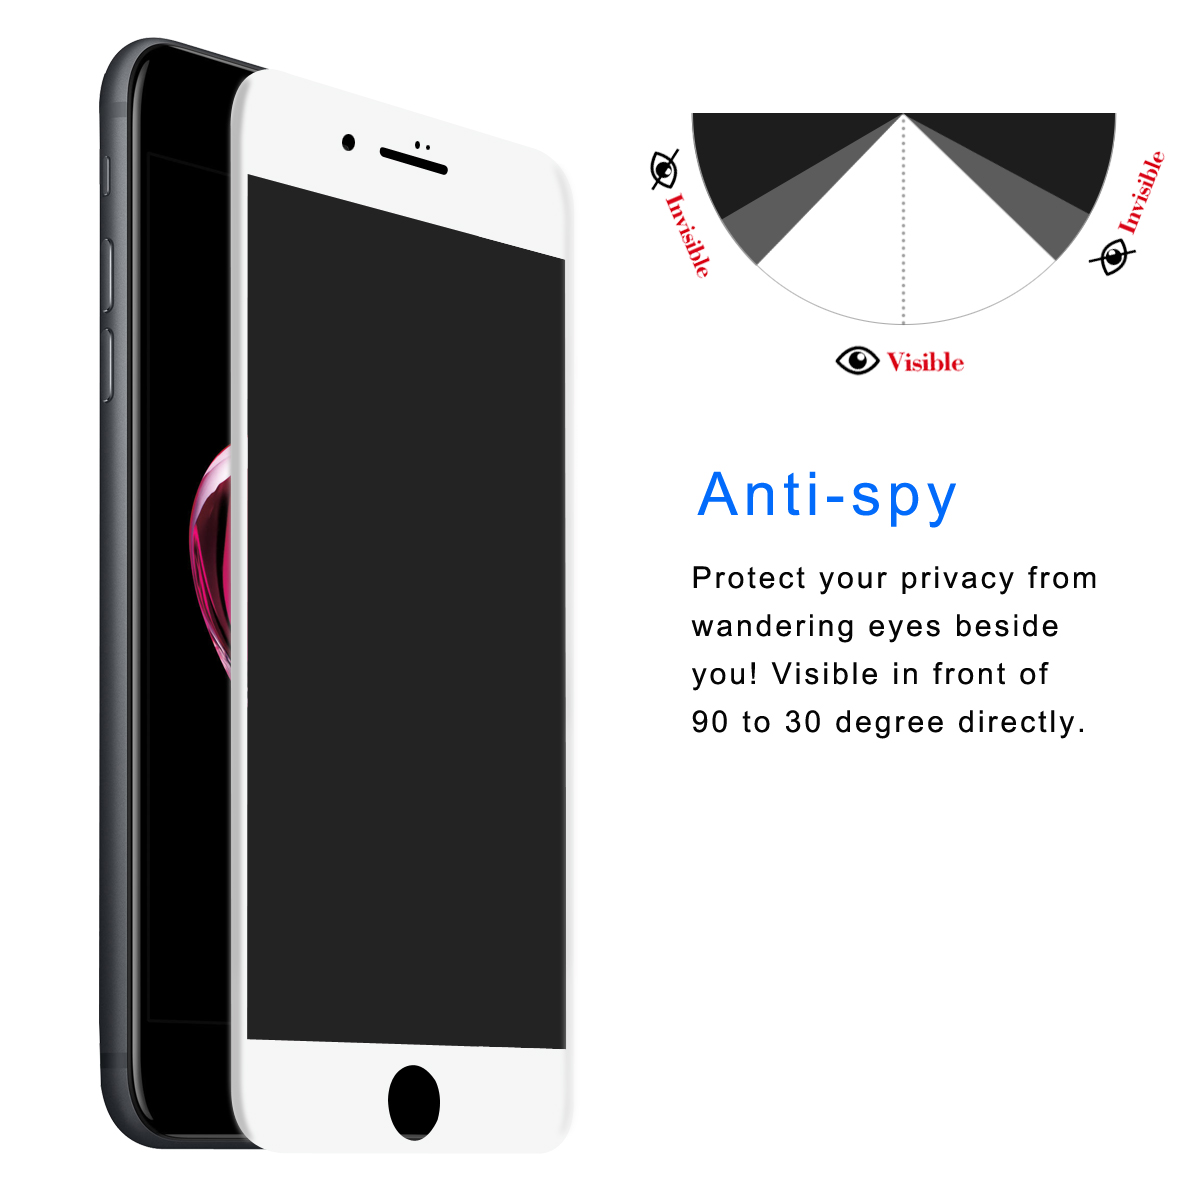 ENKAY-Anti-Spy-3D-Arc-Edge-026mm-9H-Carbon-Fiber-Tempered-Glass-Screen-Protector-for-iPhone-7-Plus-1162558-2